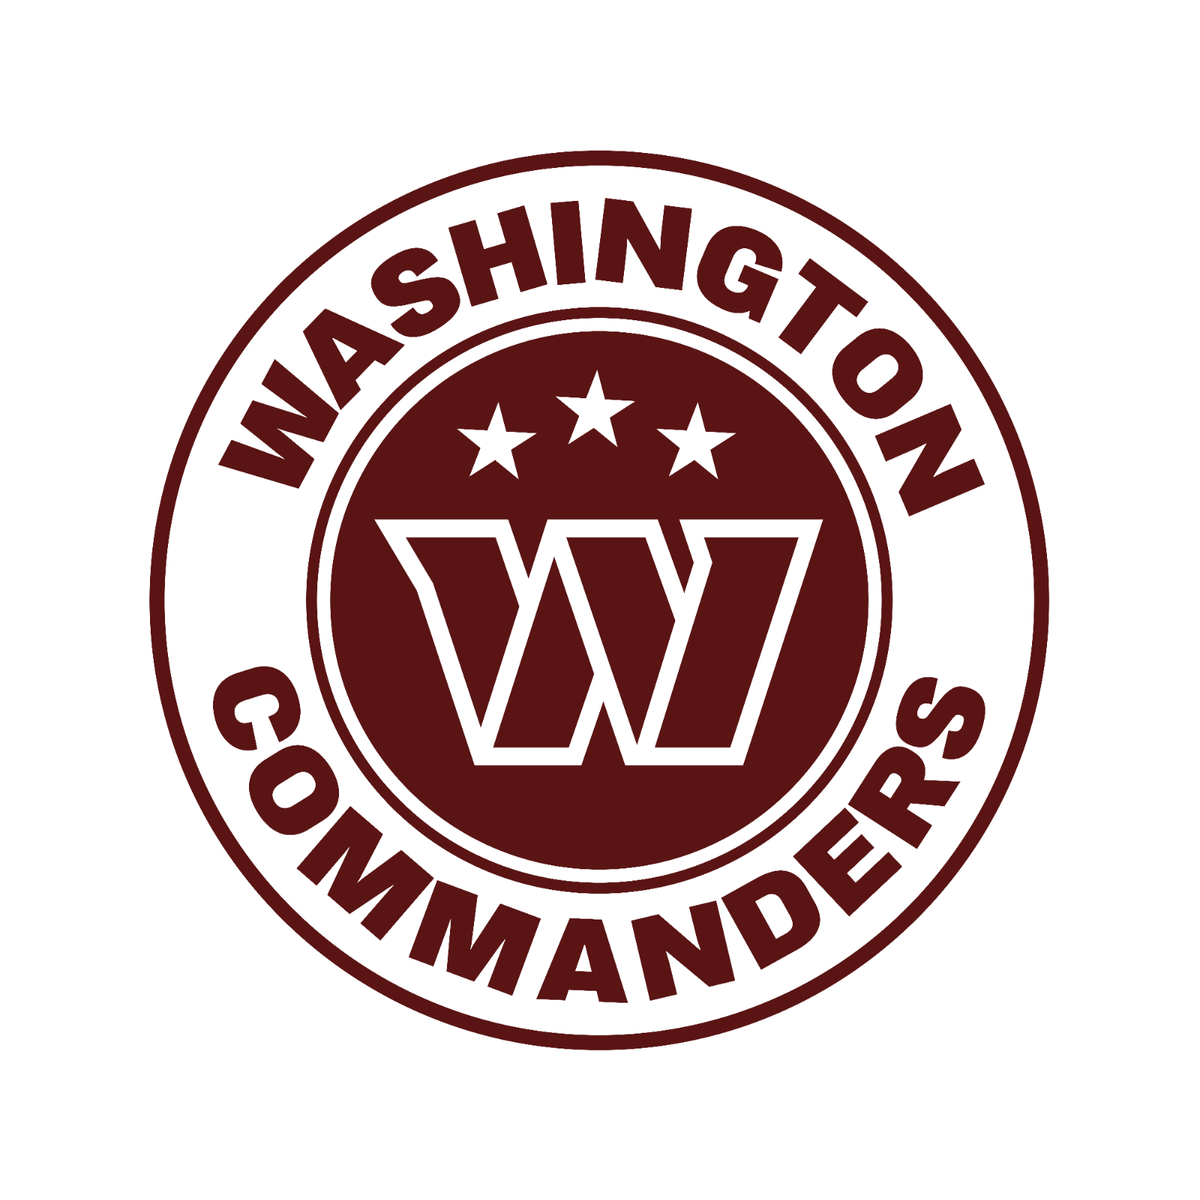 Washington Commanders NFL Football Color Sports Decal Sticker -X Large 8"